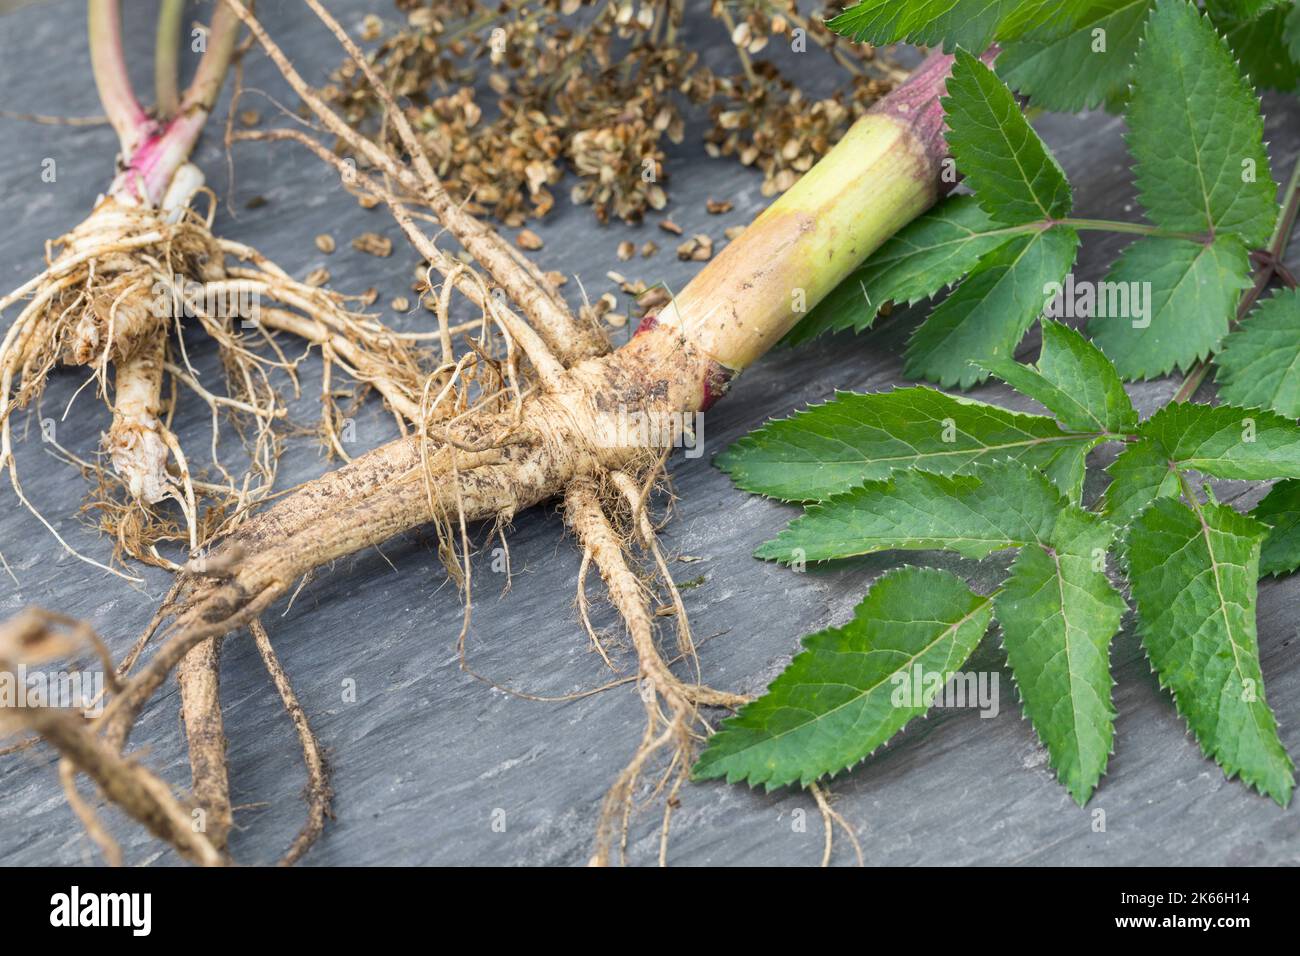 Wild angelica (Angelica sylvestris), collected roots with leaf and fruits, Germany Stock Photo